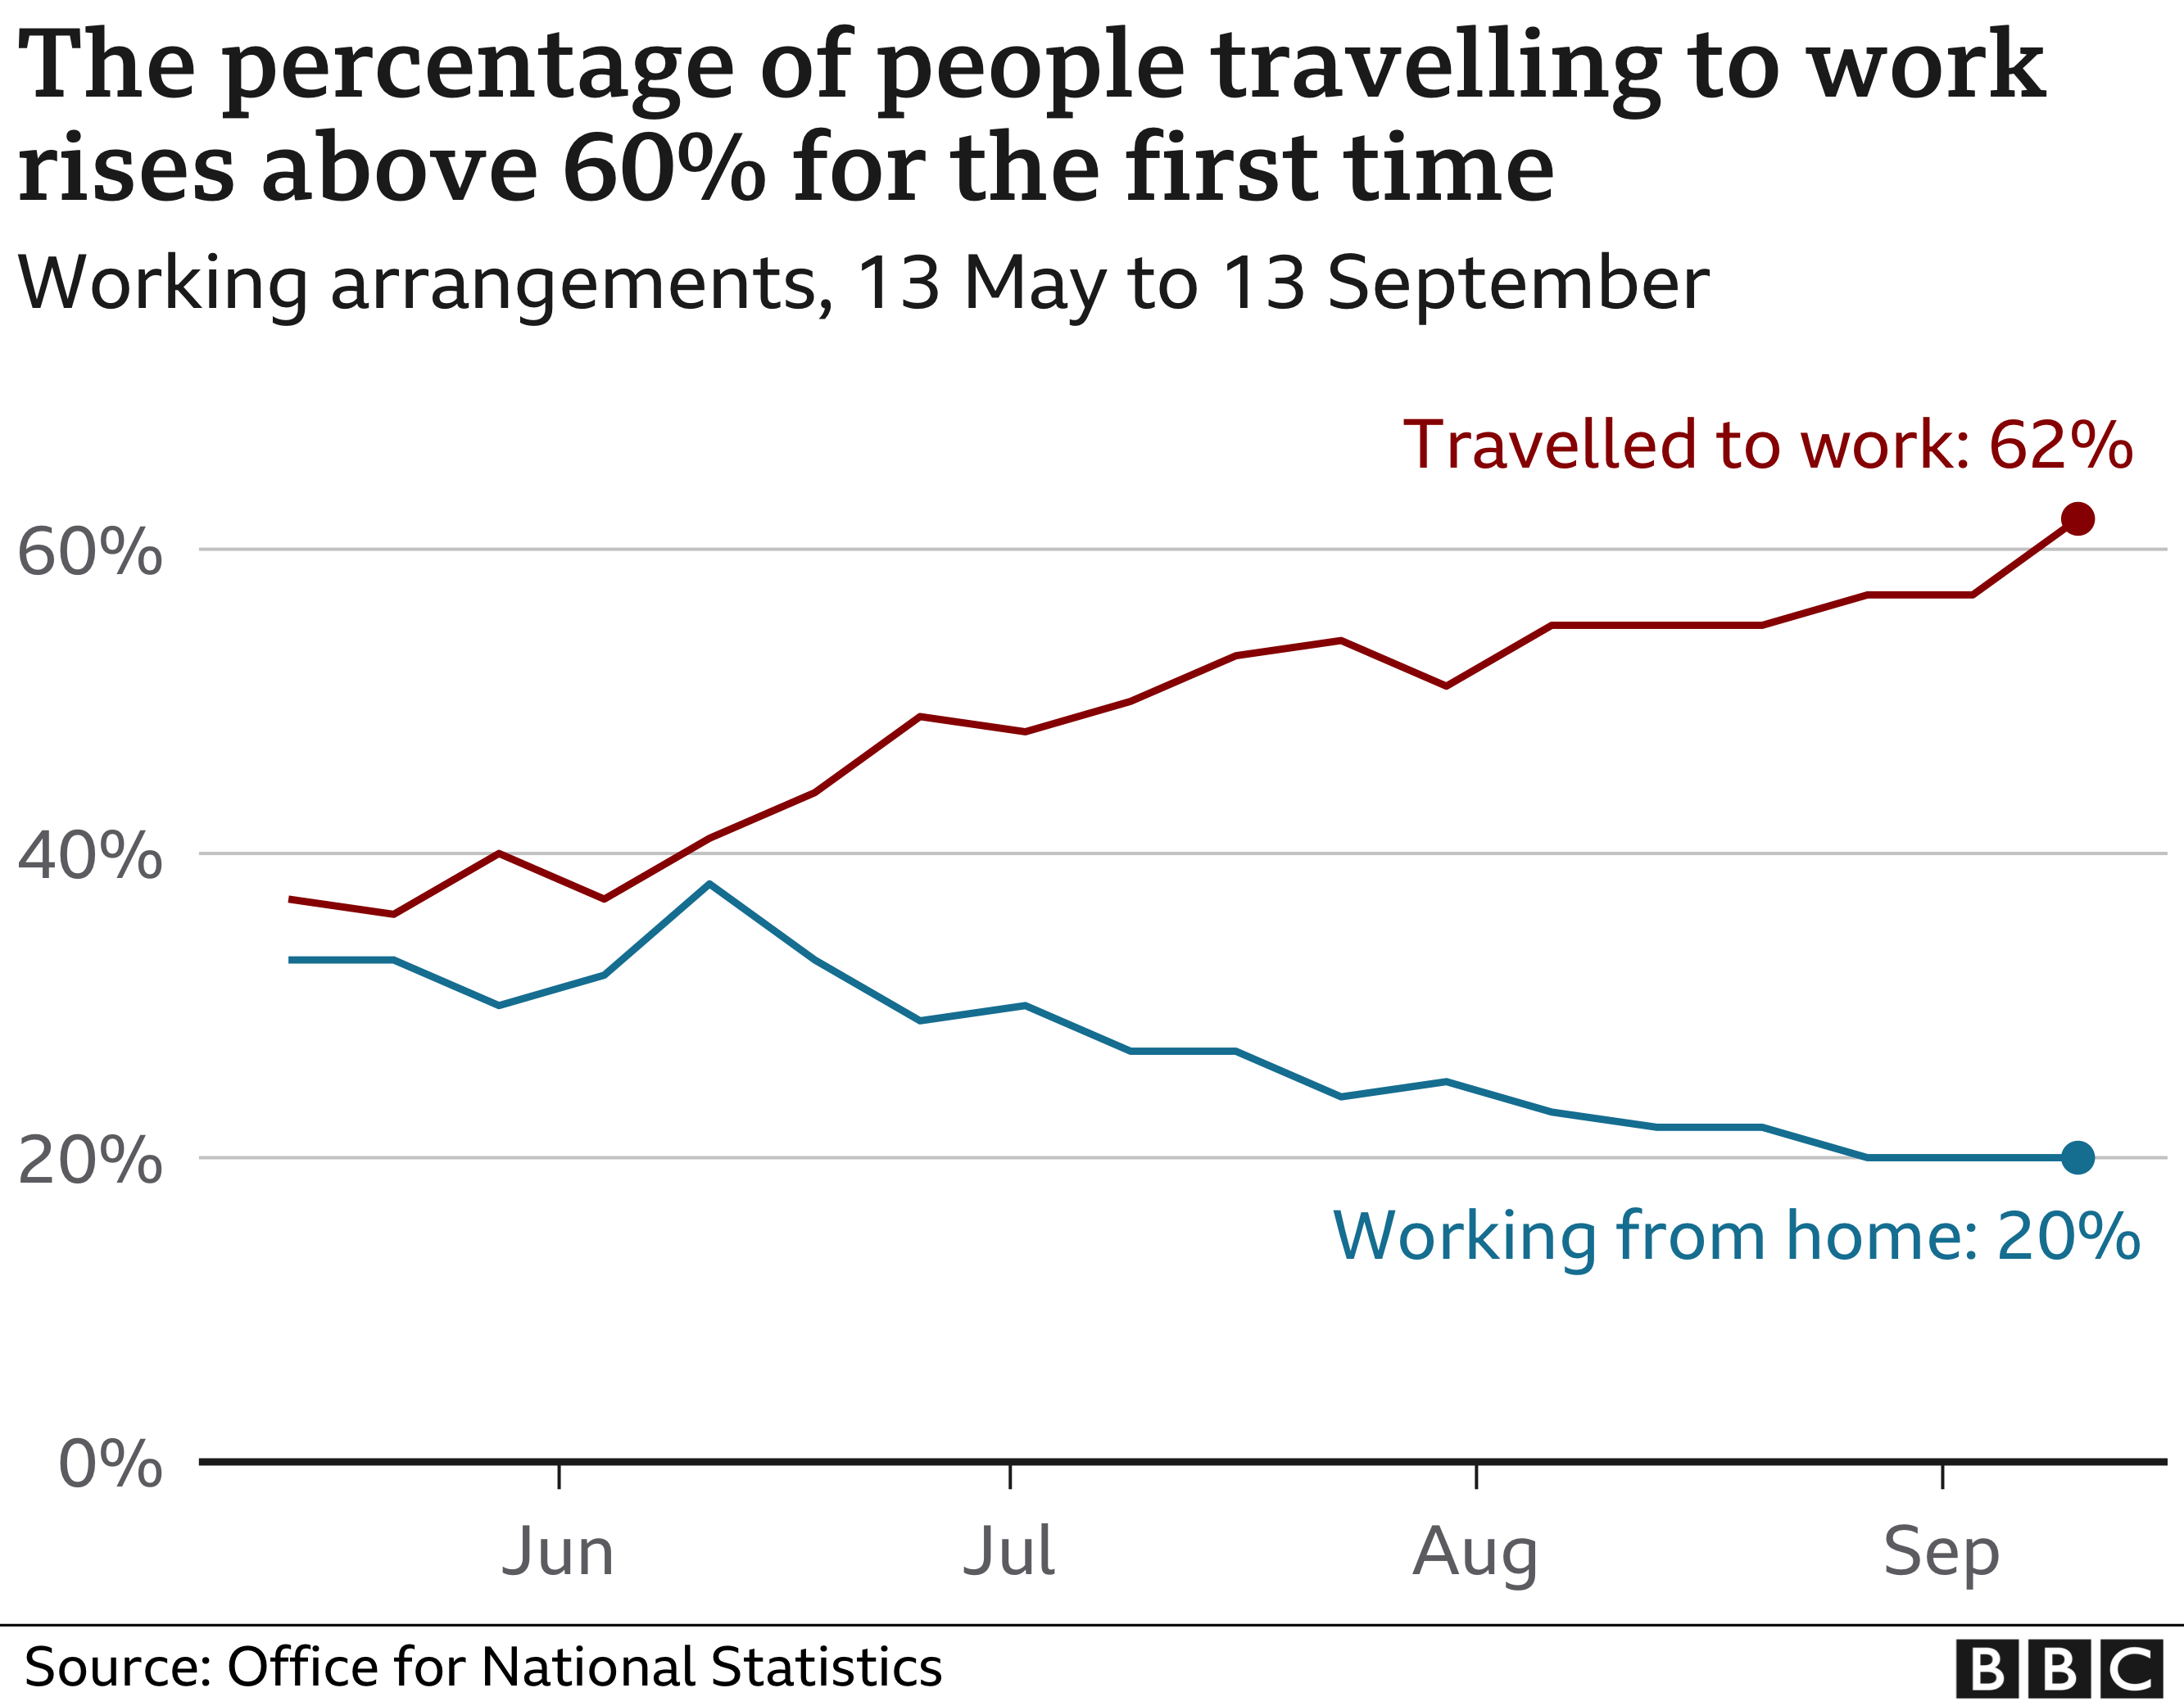 Percentage of people working from home